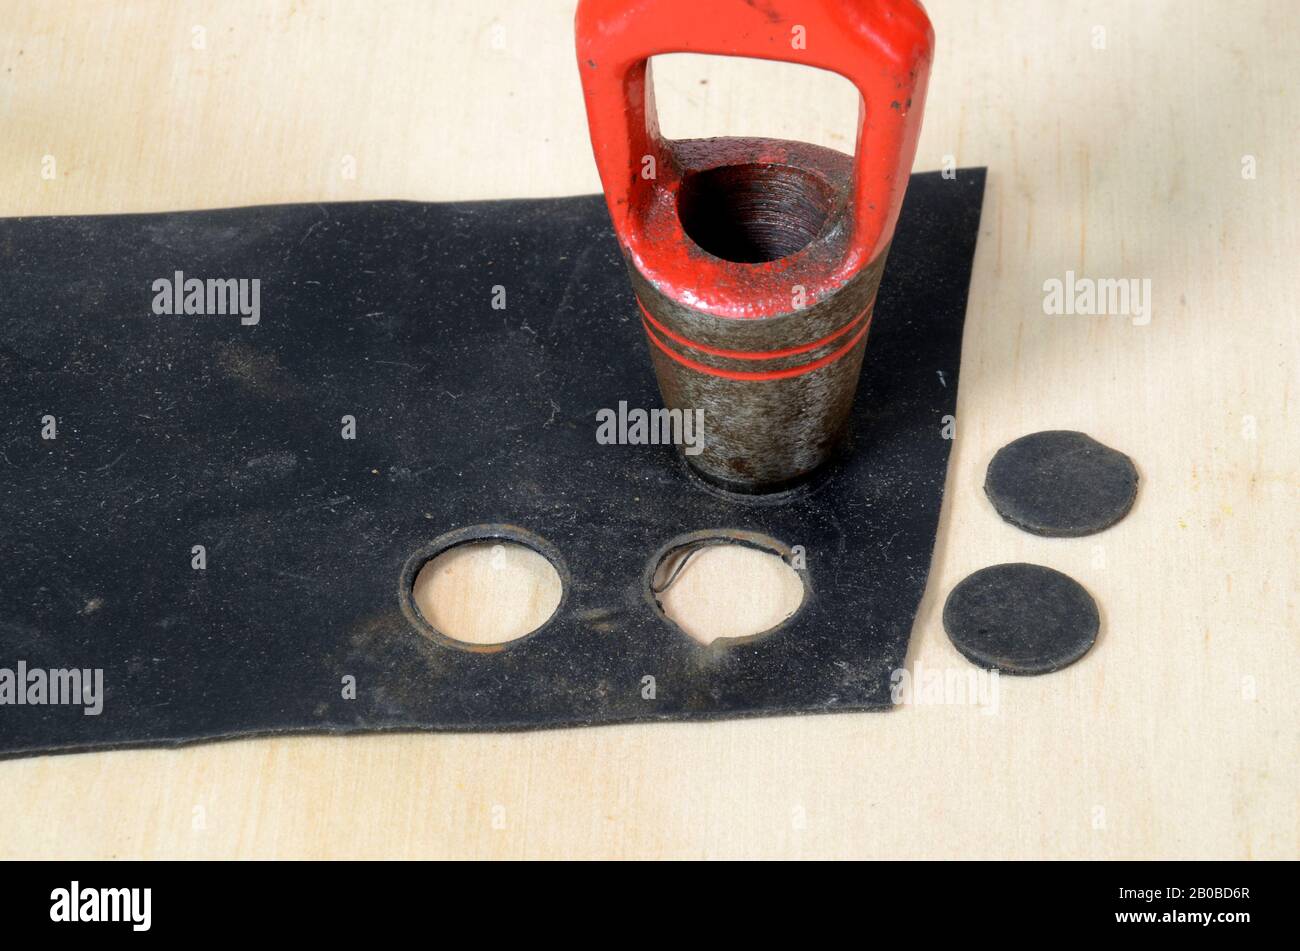 Closeup on a red hollow punch being used on a piece of black rubber to make roud gasket pieces. Stock Photo